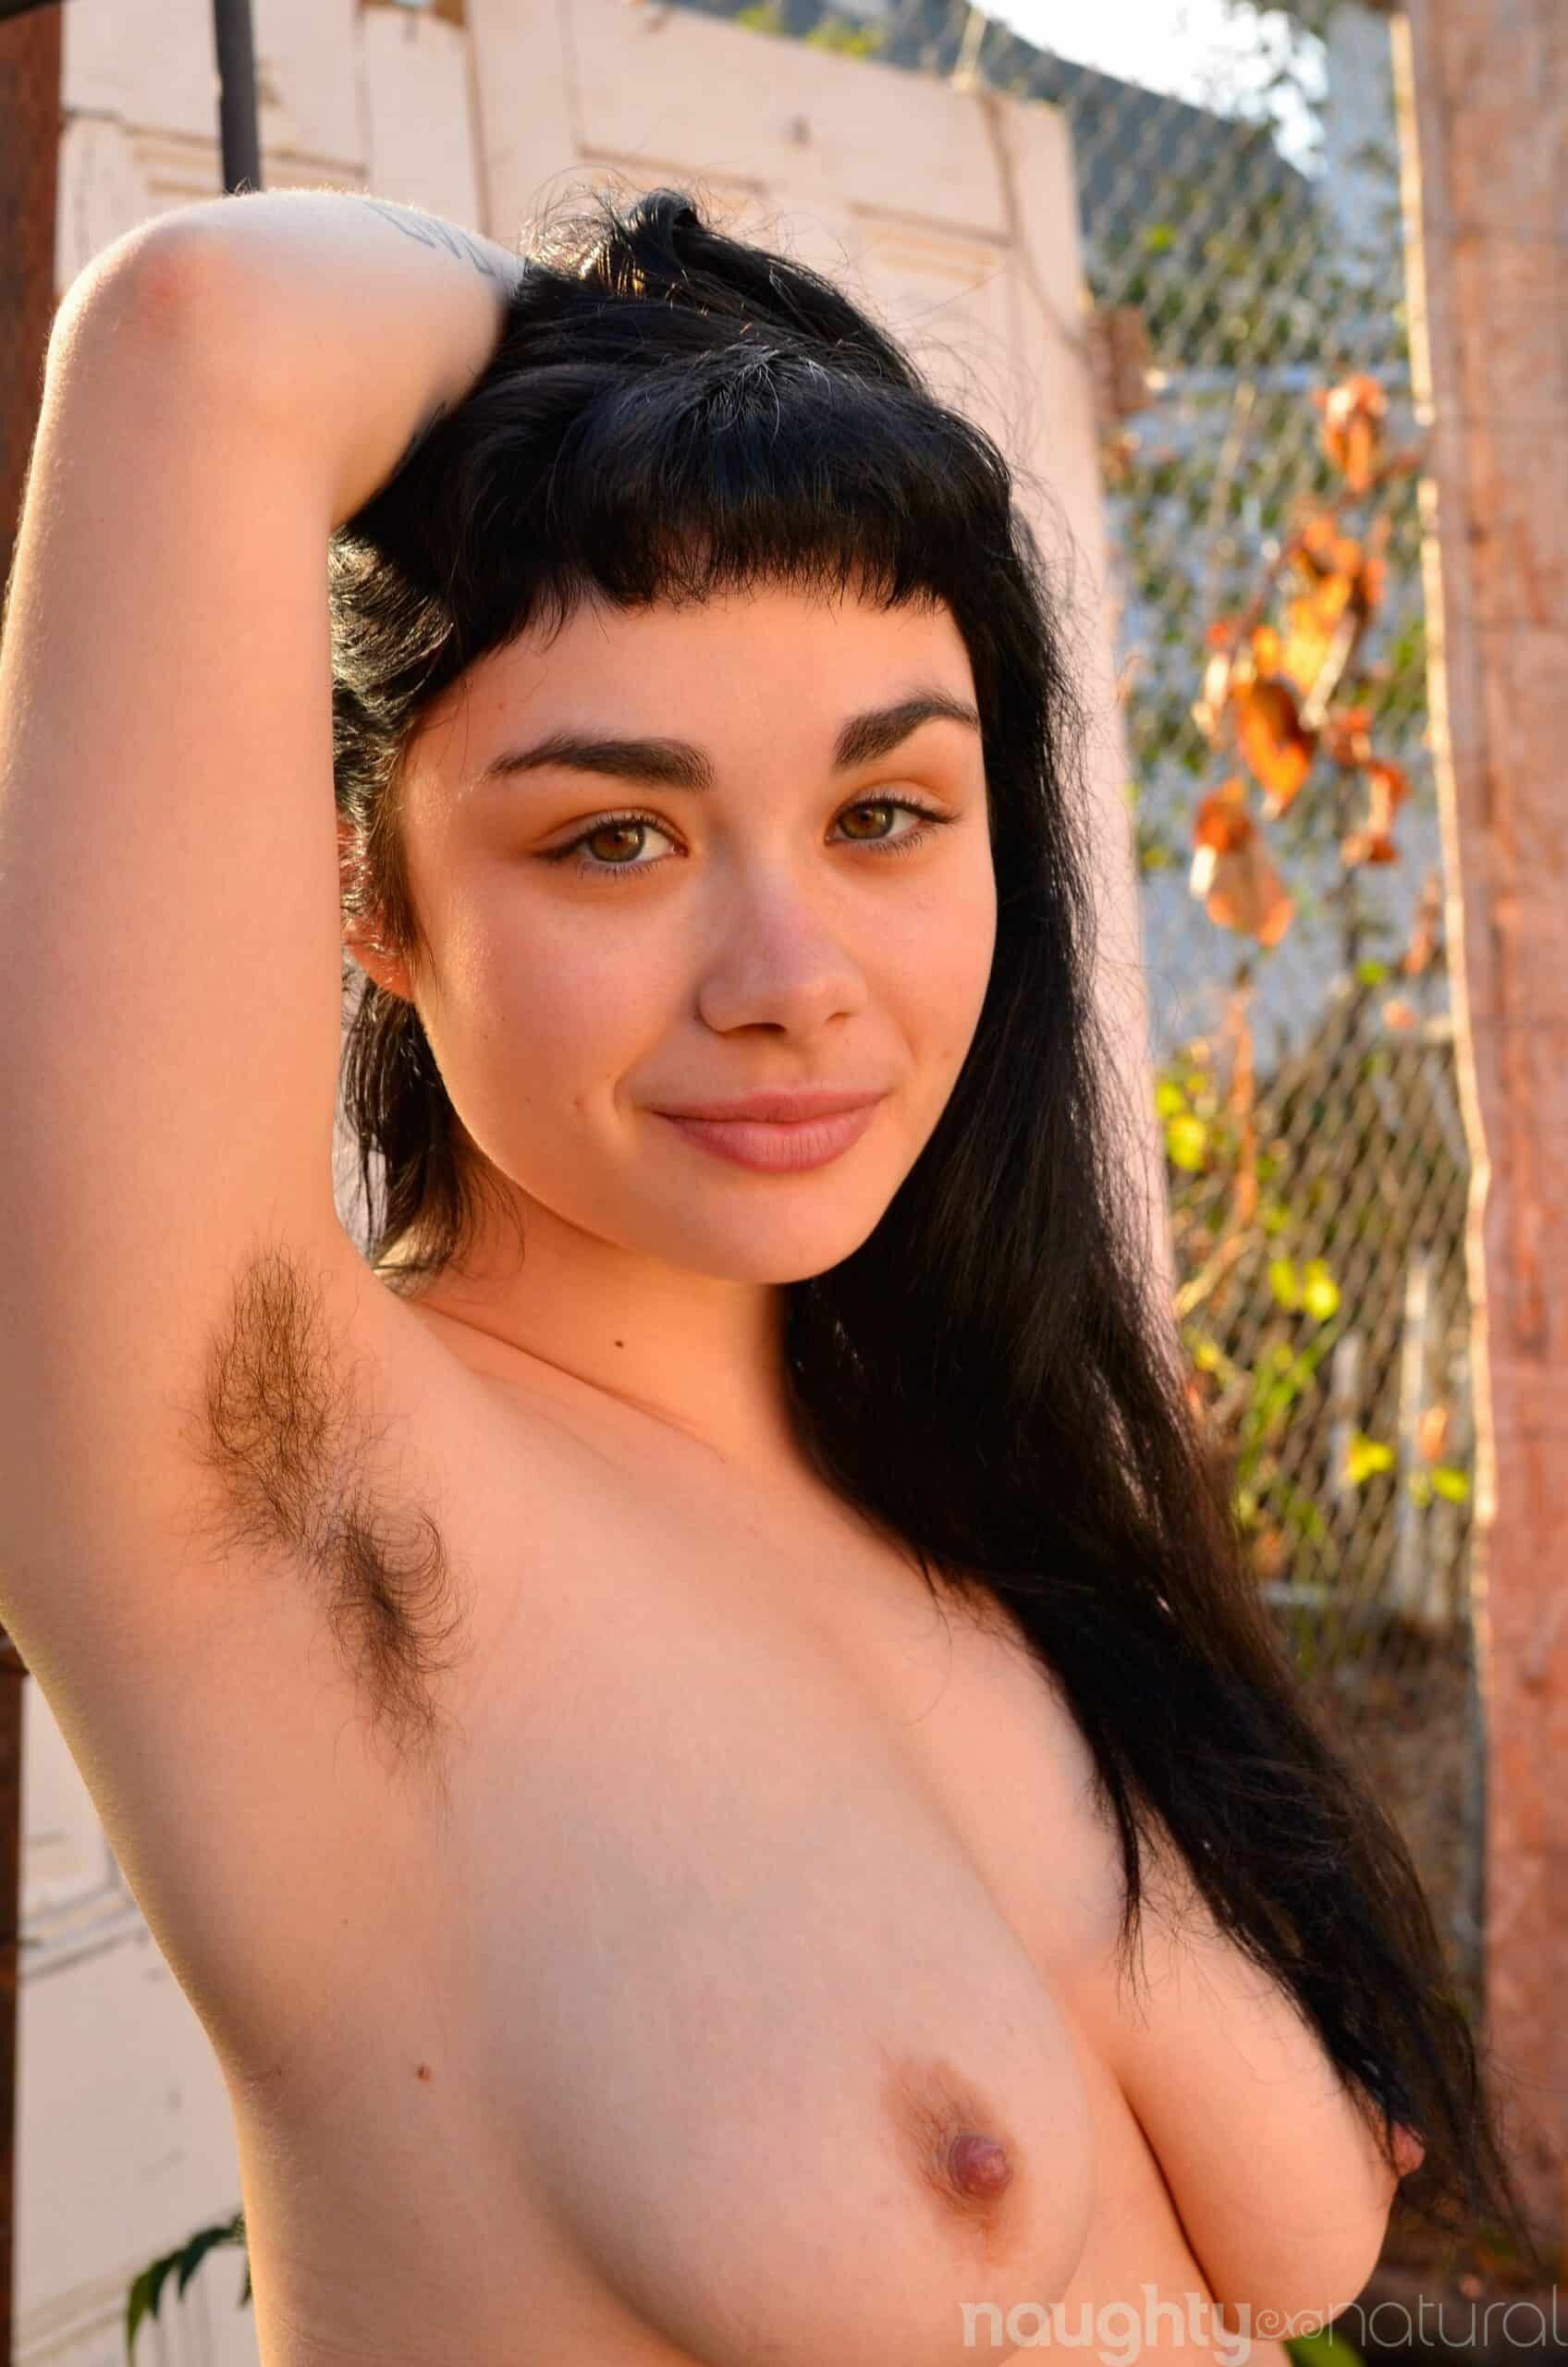 naughtynatural louise - Hairy Asian Girls